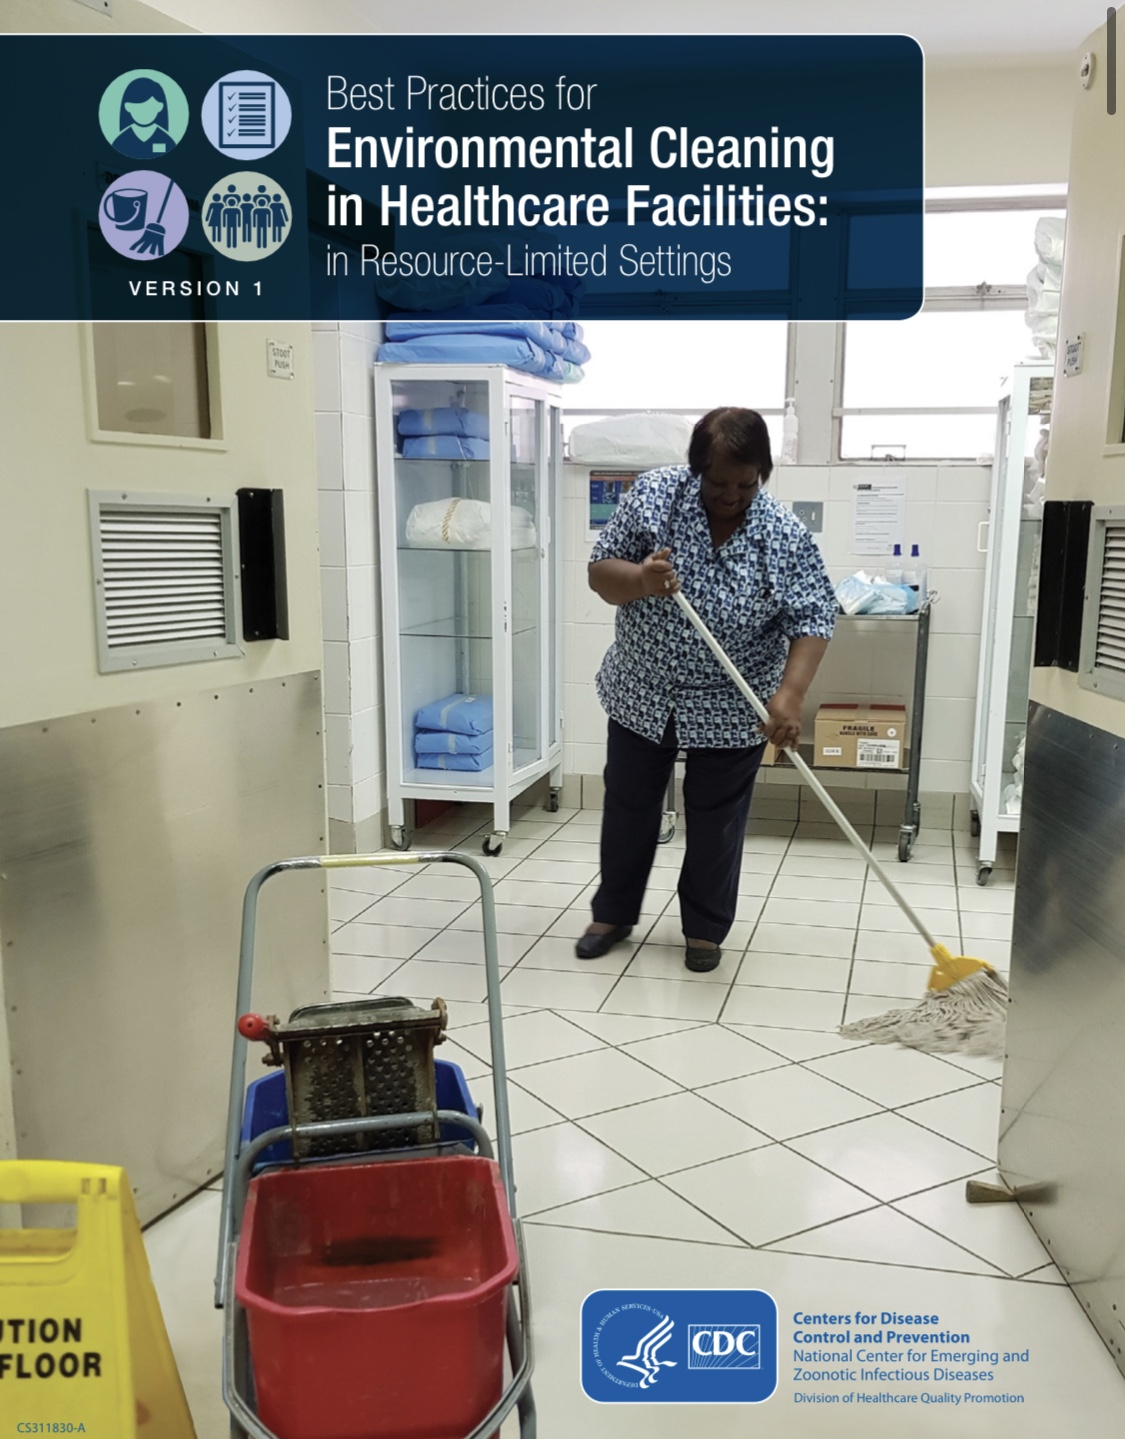 Best Practices for Environmental Cleaning in Healthcare Facilities